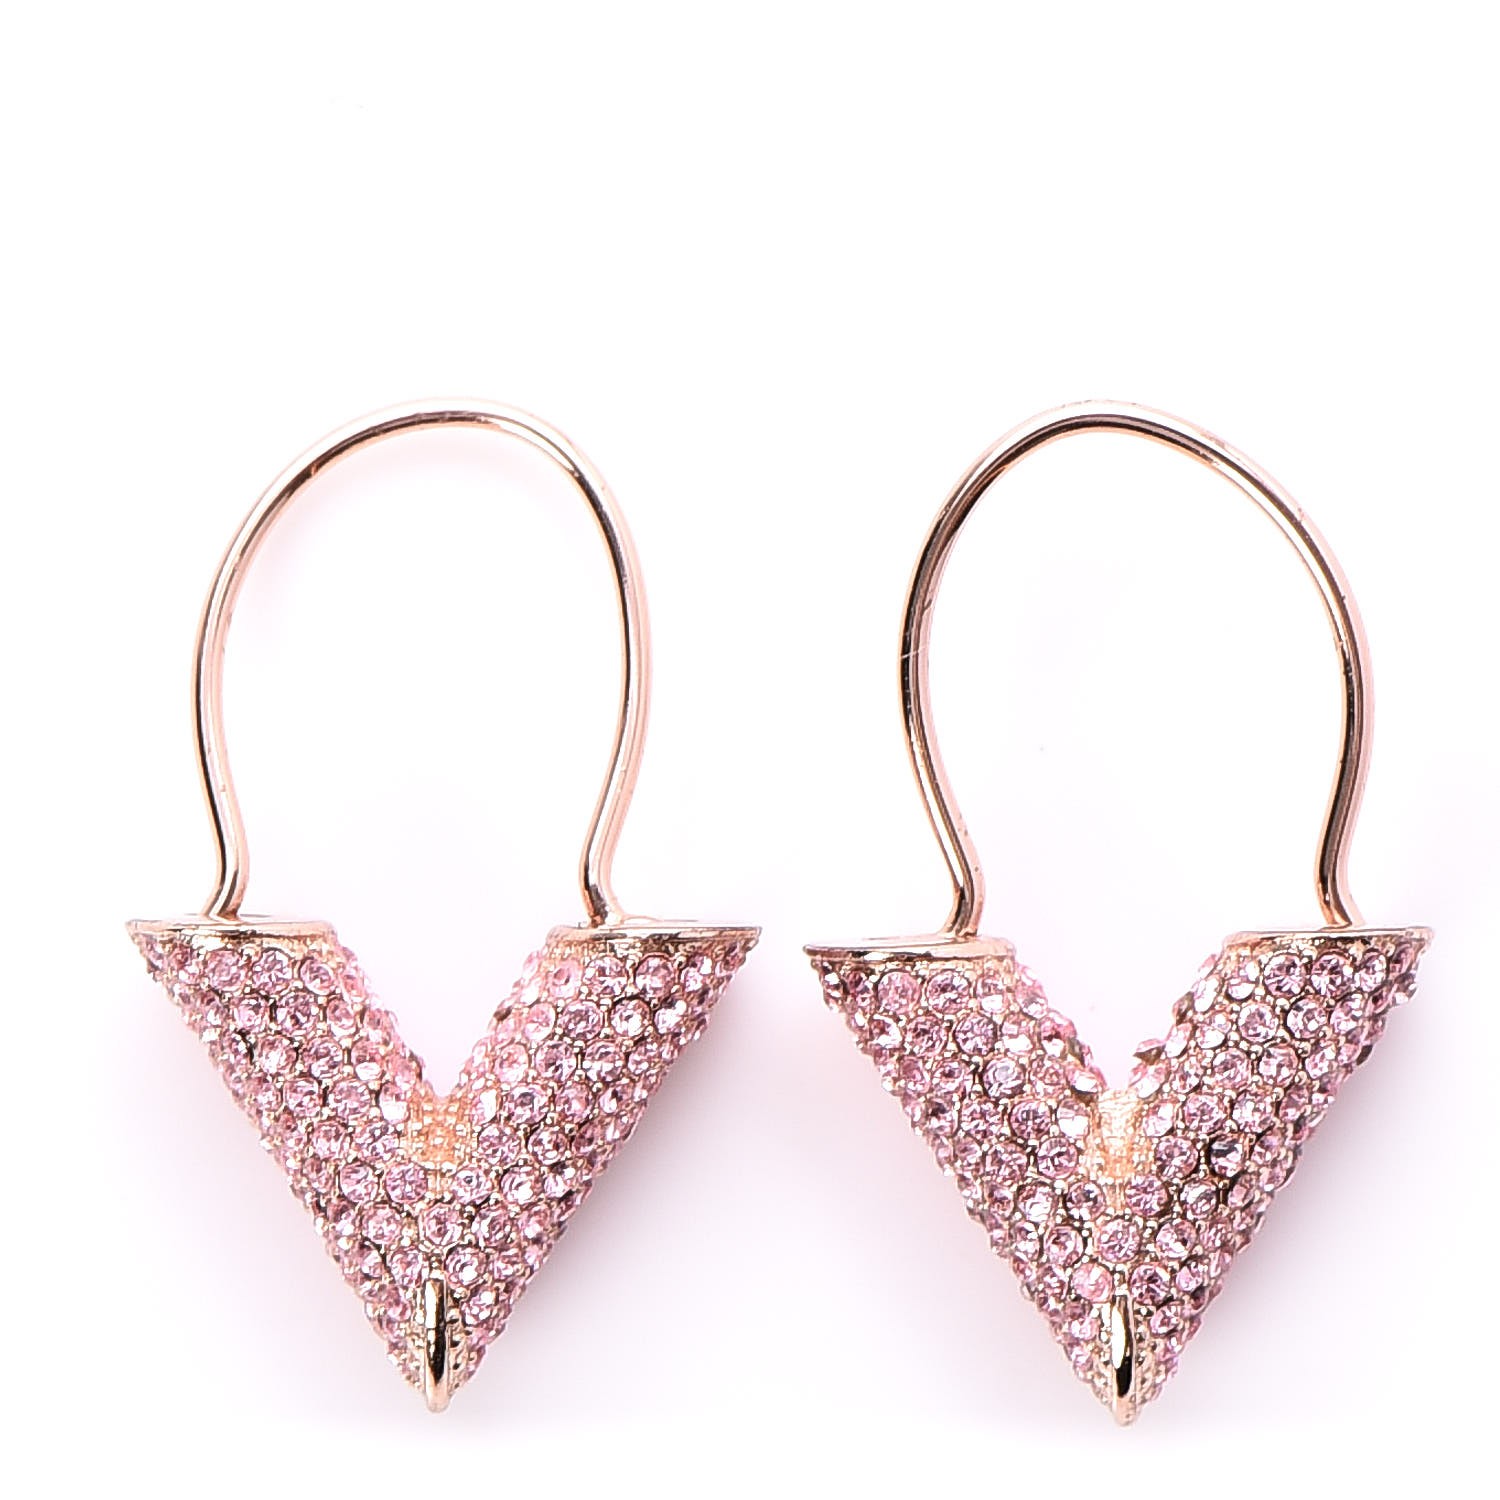 Crystal Essential V Strass Earrings Pink Gold 242550 FASHIONPHILE